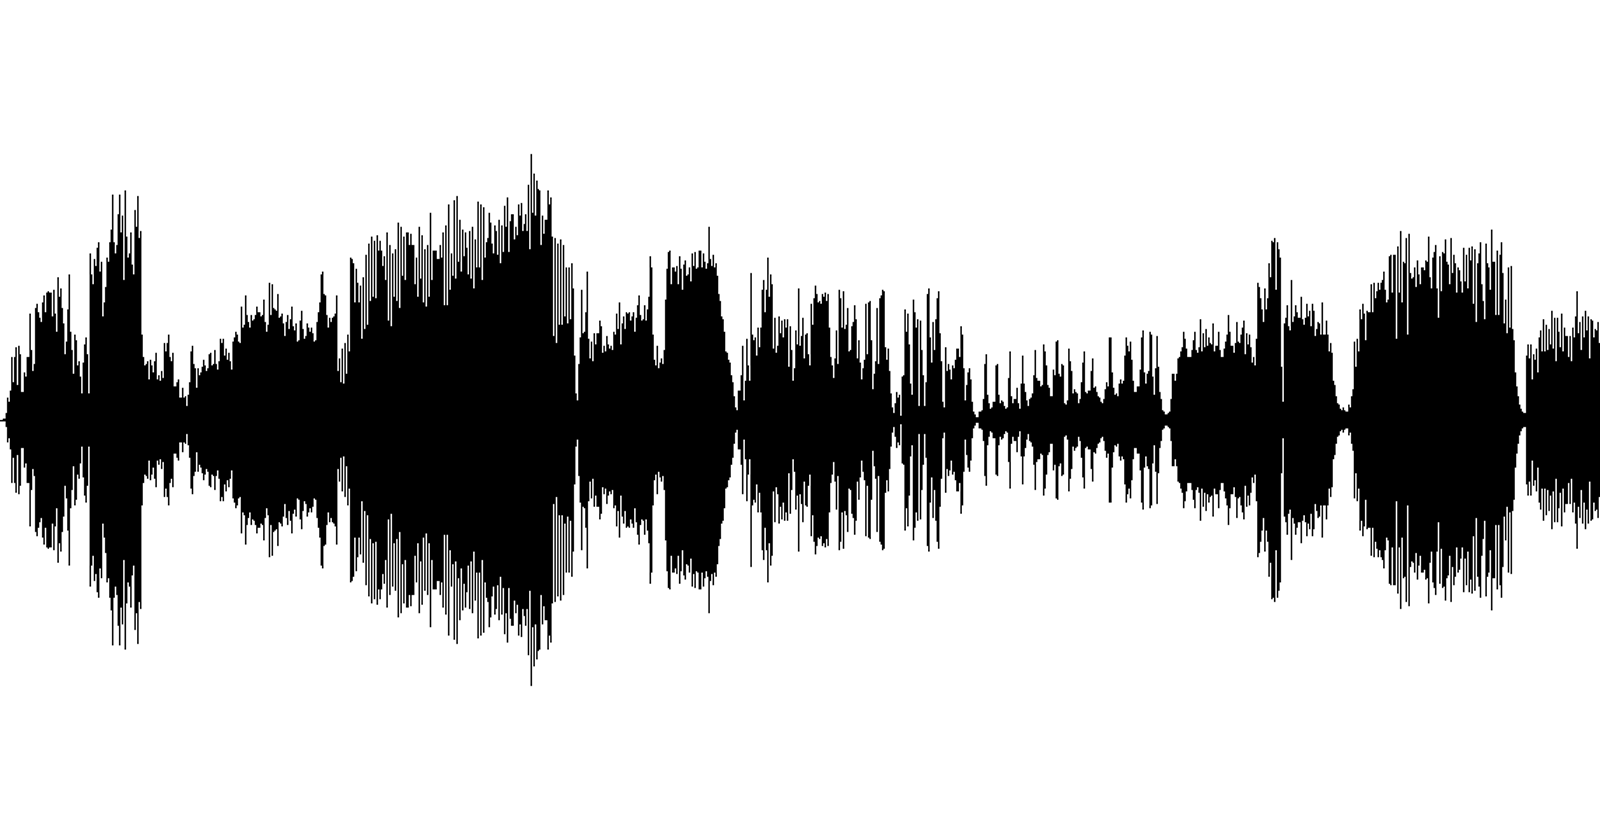 Generating Audio Waveform Images in Ruby